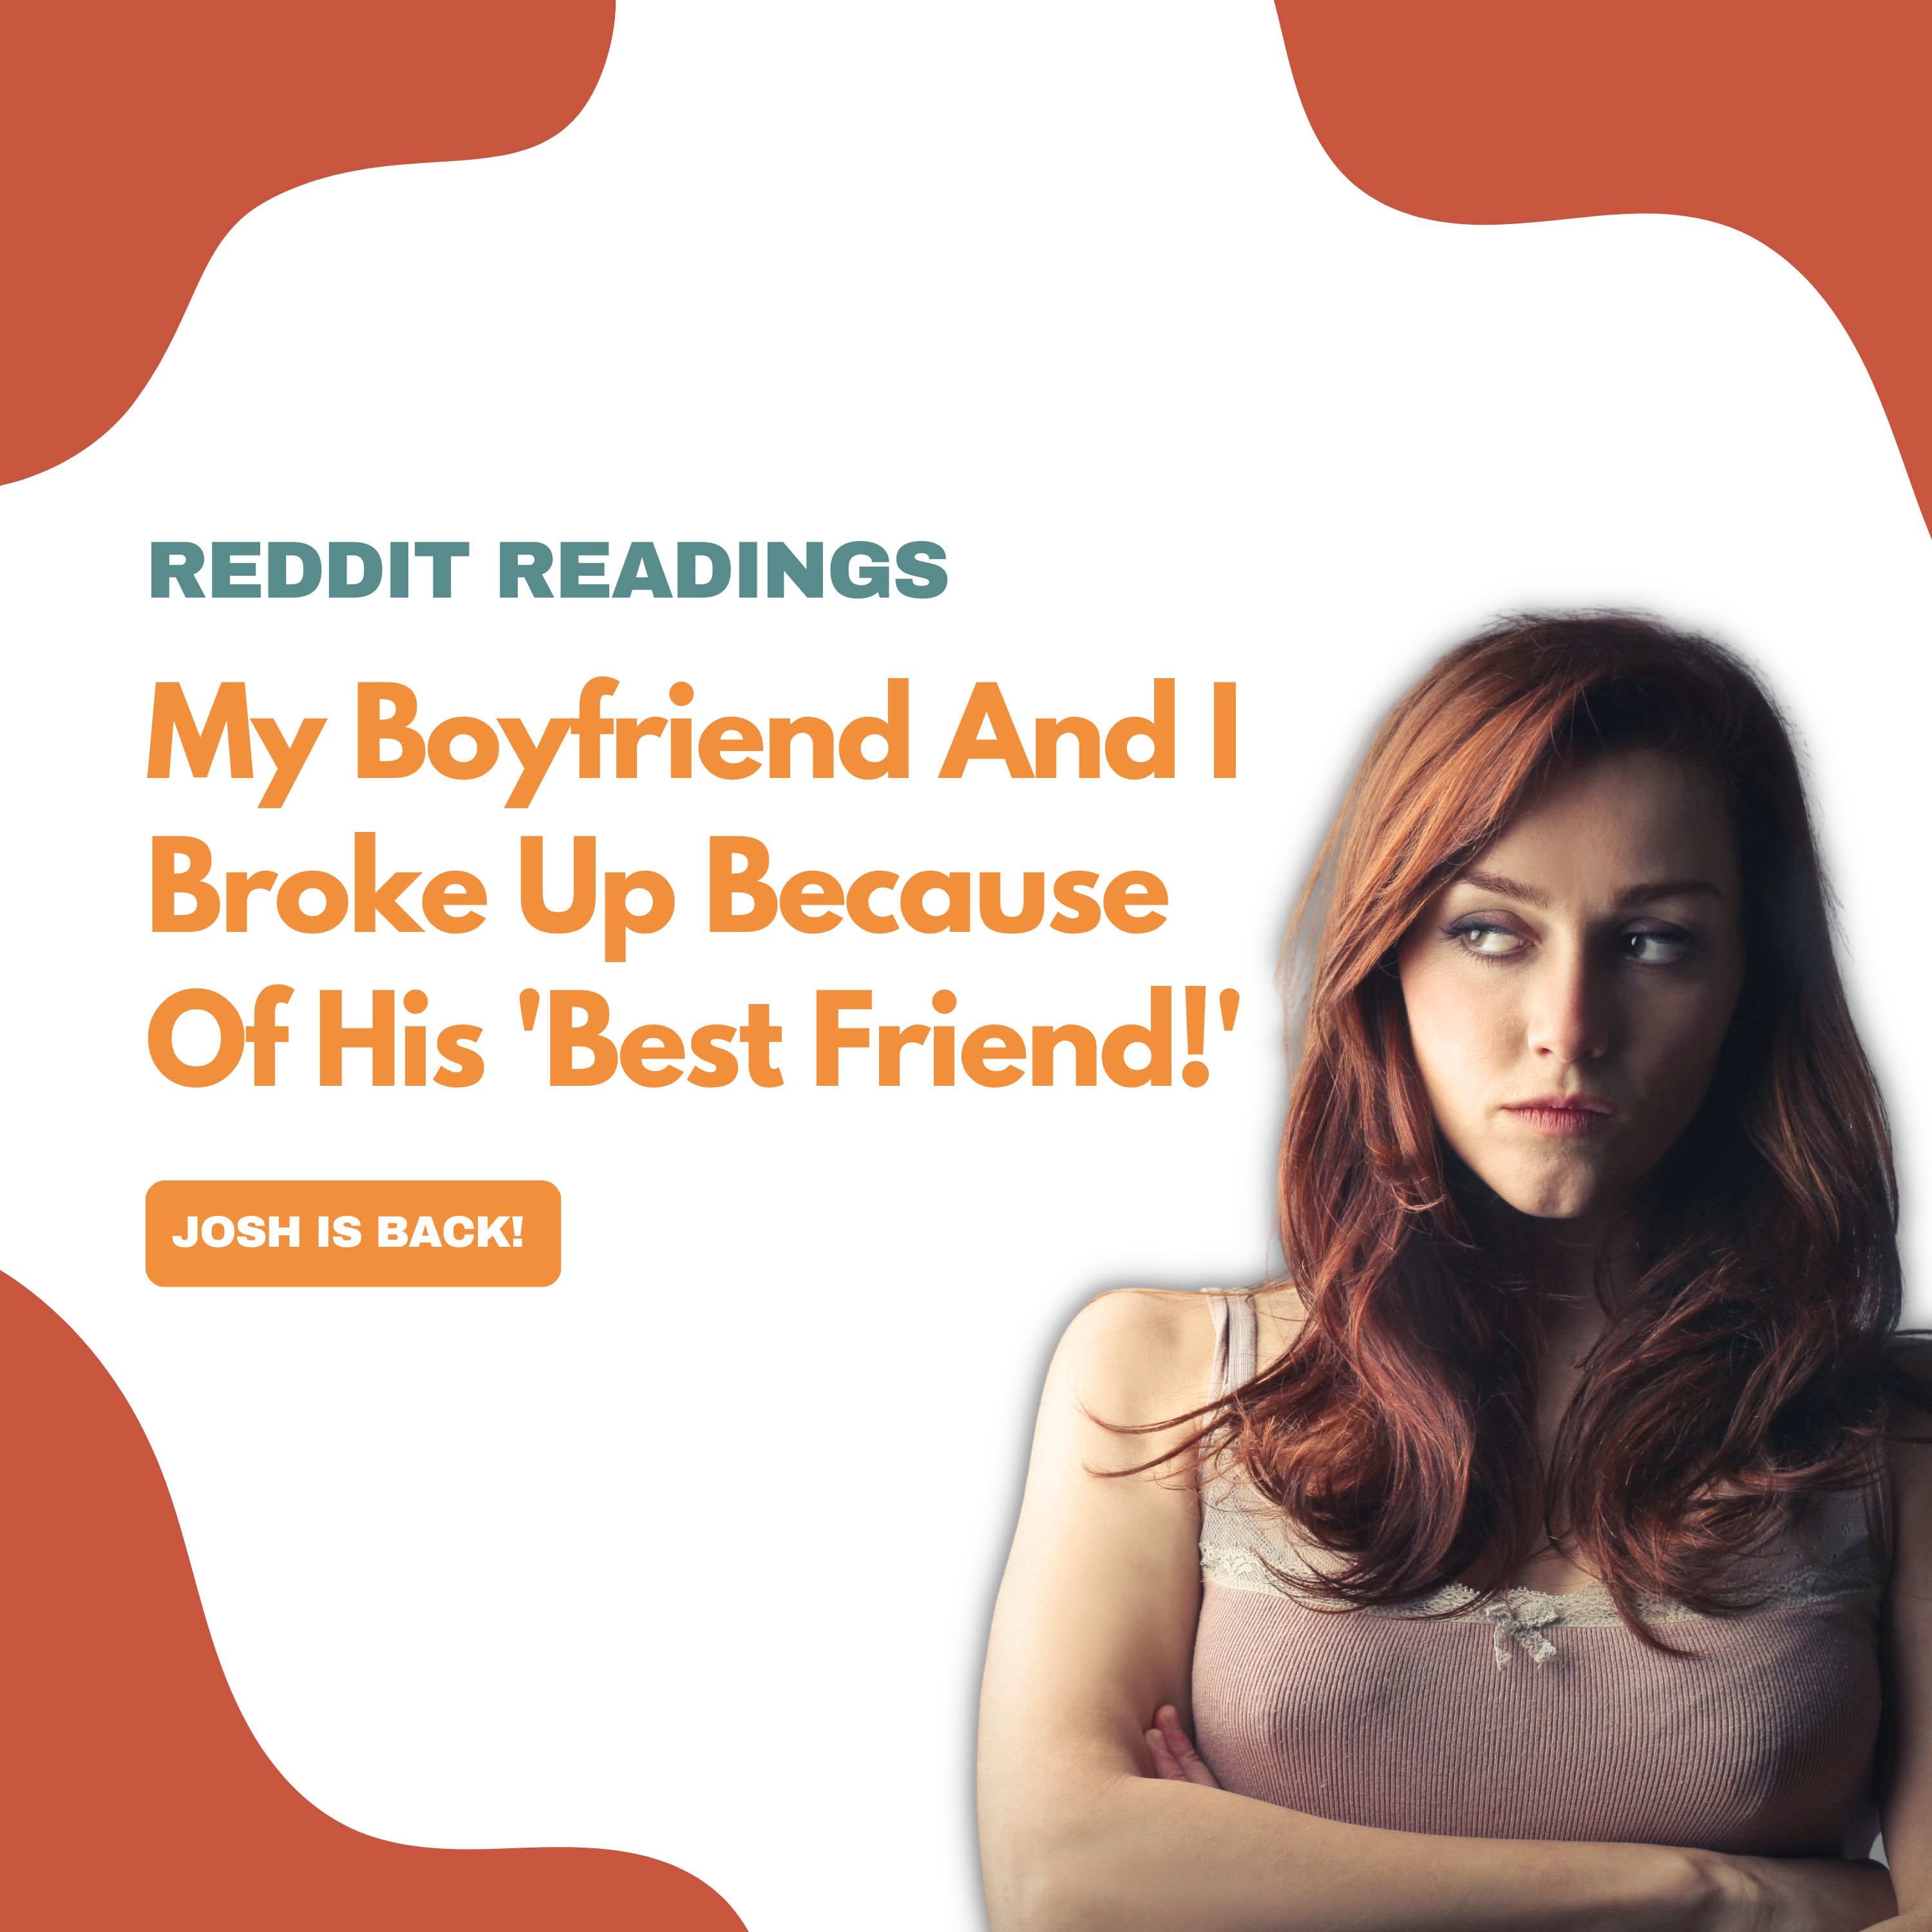 Reddit Readings | My Boyfriend And I Broke Up Because Of His 'Best Friend!'